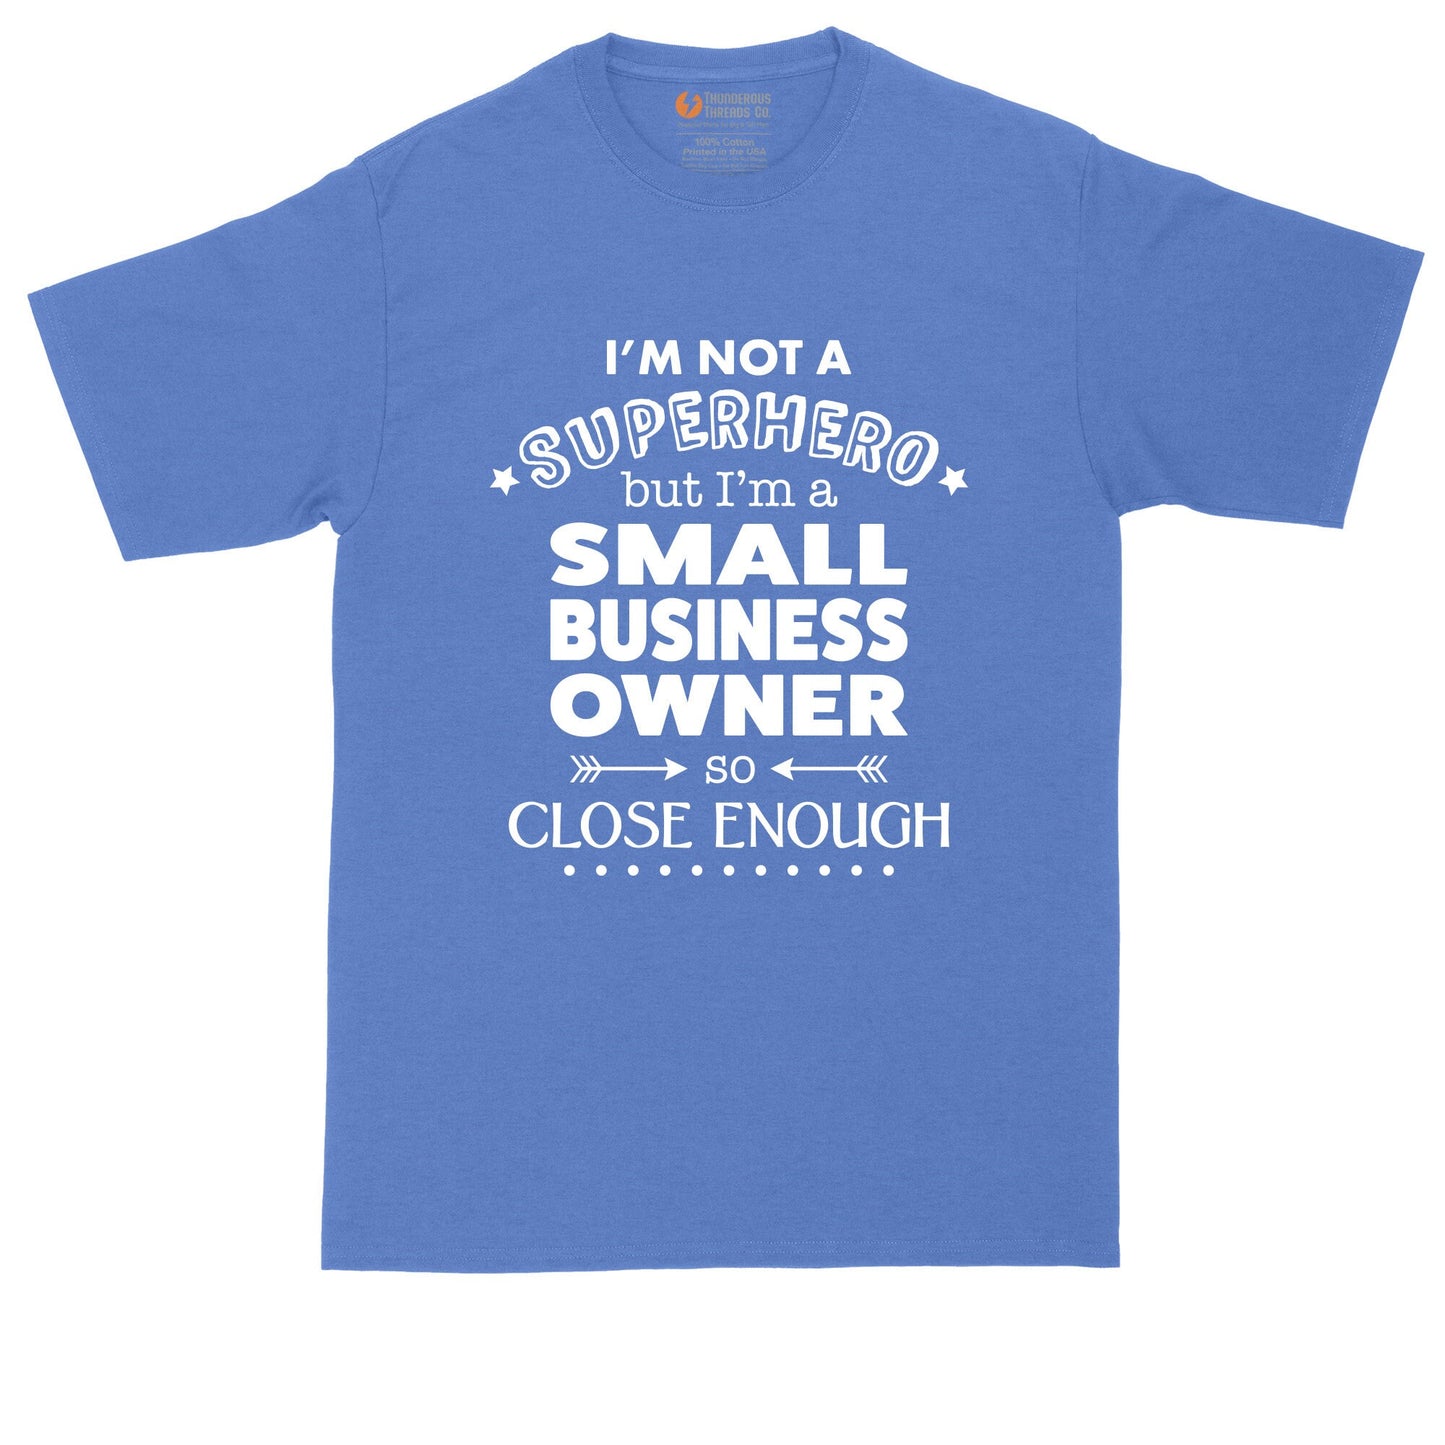 I'm Not a Super Hero - I'm a Small Business Owner | Big and Tall Mens T-Shirt | Funny T-Shirt | Graphic T-Shirt